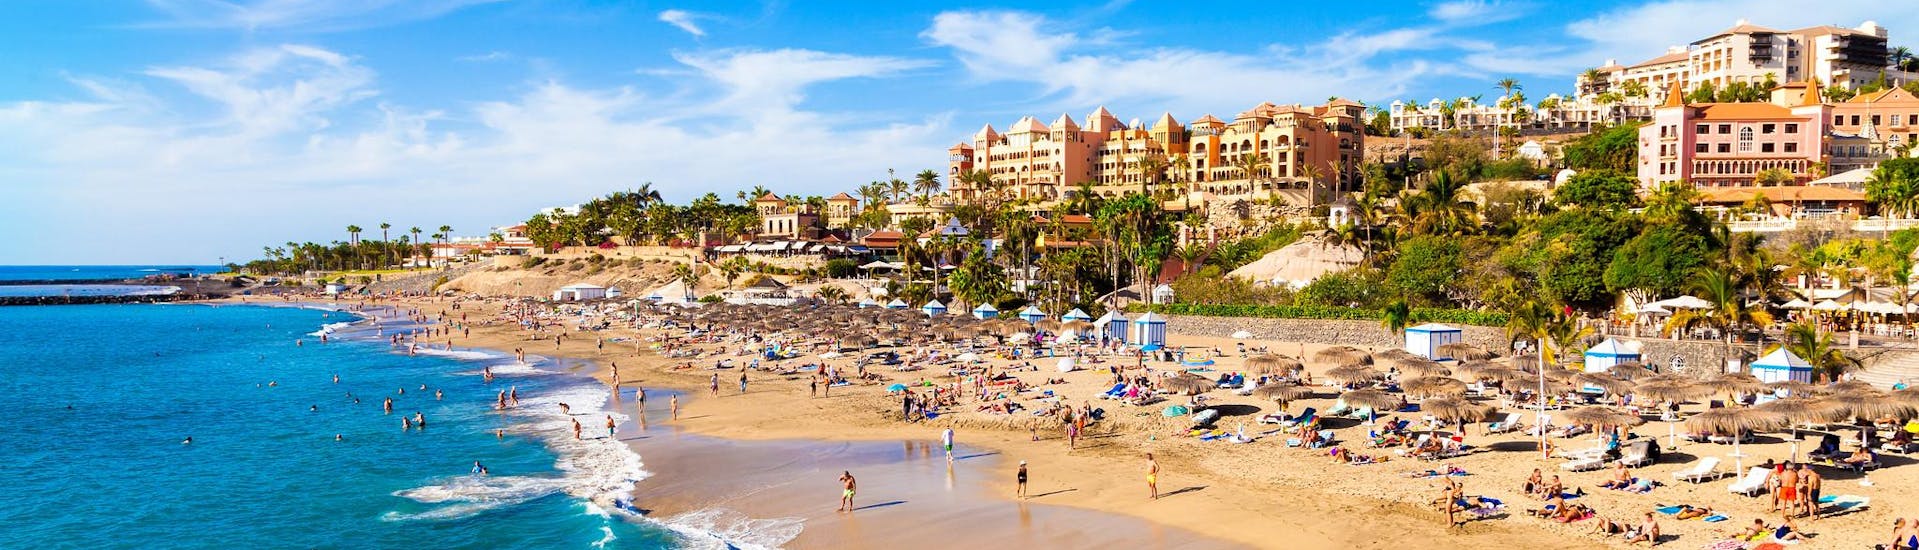 A beach in Costa Adeje on Tenerife where many water sports activities take place.